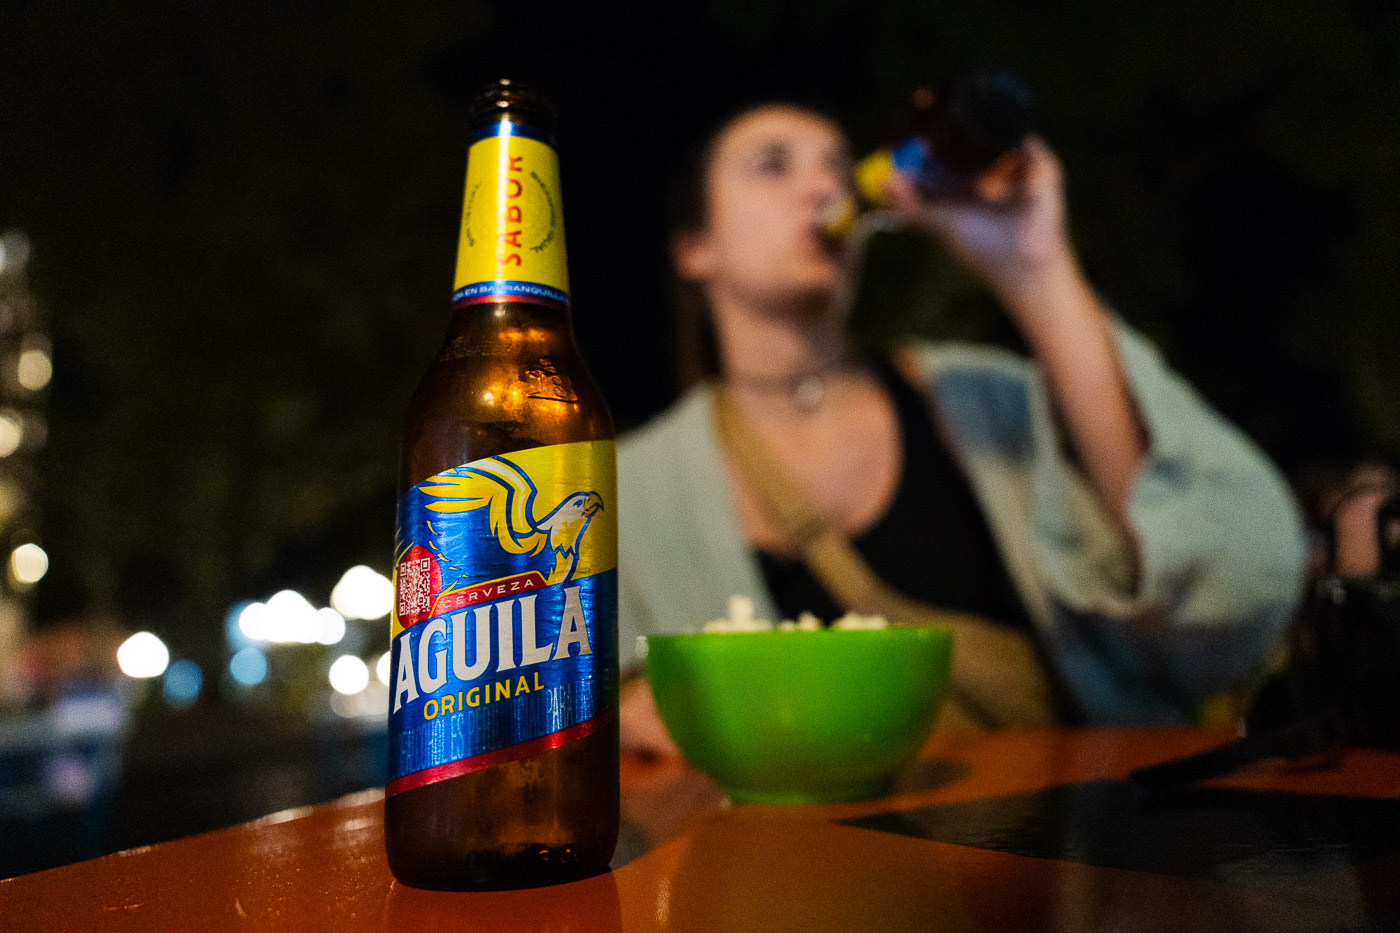 A local Aguila beer bottle while Sara sips from another bottle in the background.